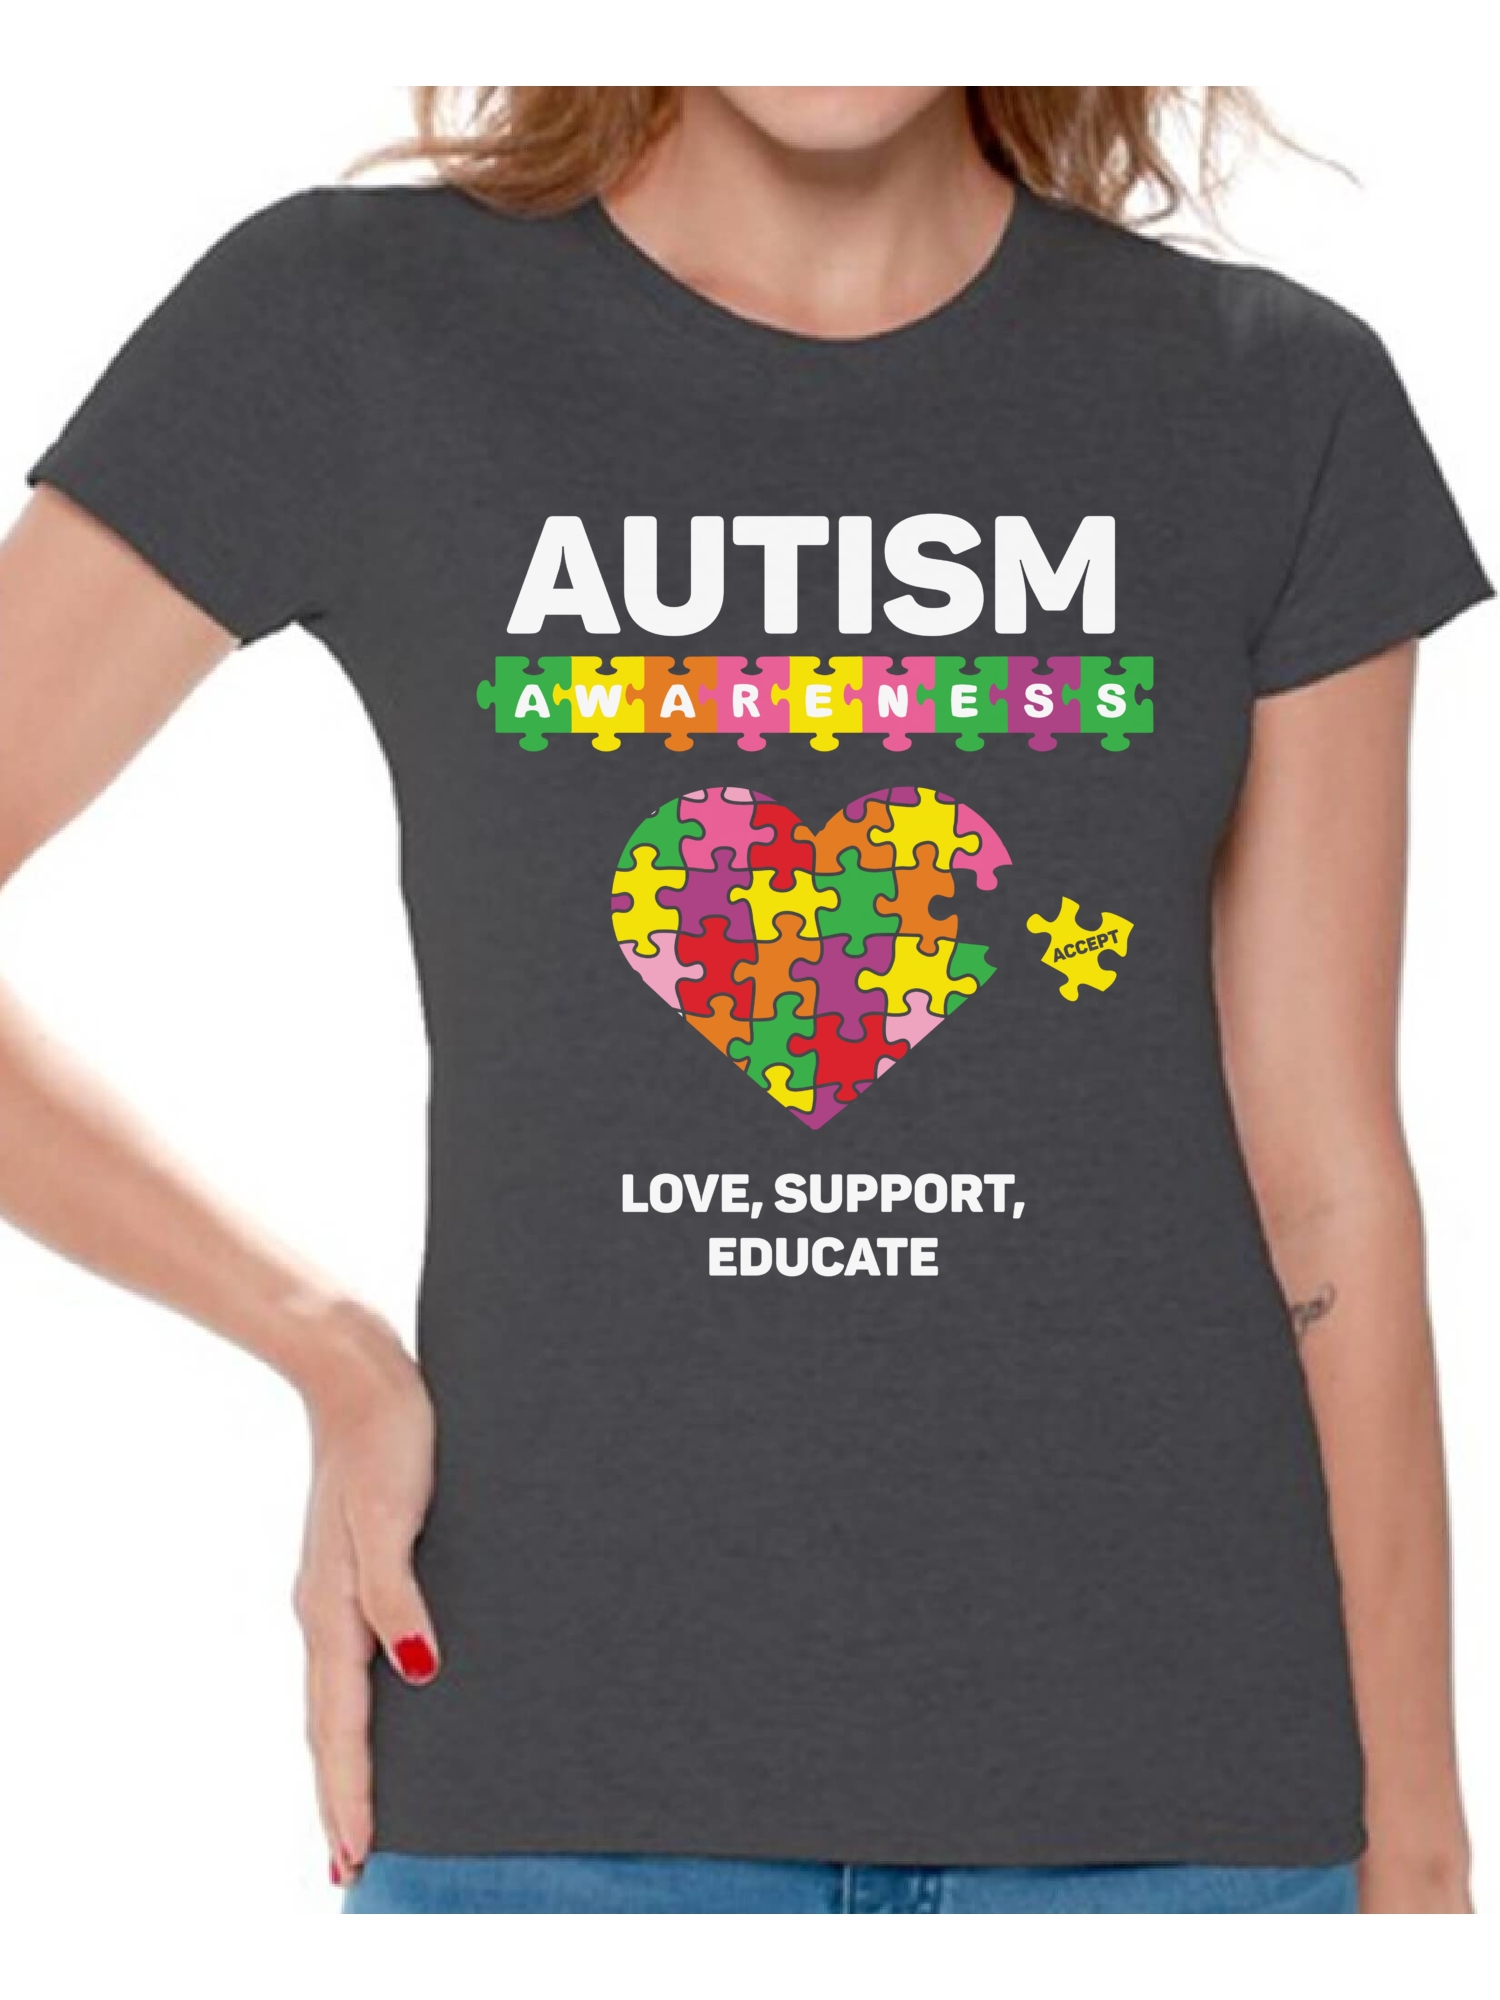 Awkward Styles Love Support Educate Autism Shirt for Women Autism Awareness Puzzle Shirt Women Autism Awareness Shirts Women's Autism T Shirt Autism Awareness Gifts for Her Autistic Pride Gifts - image 1 of 4